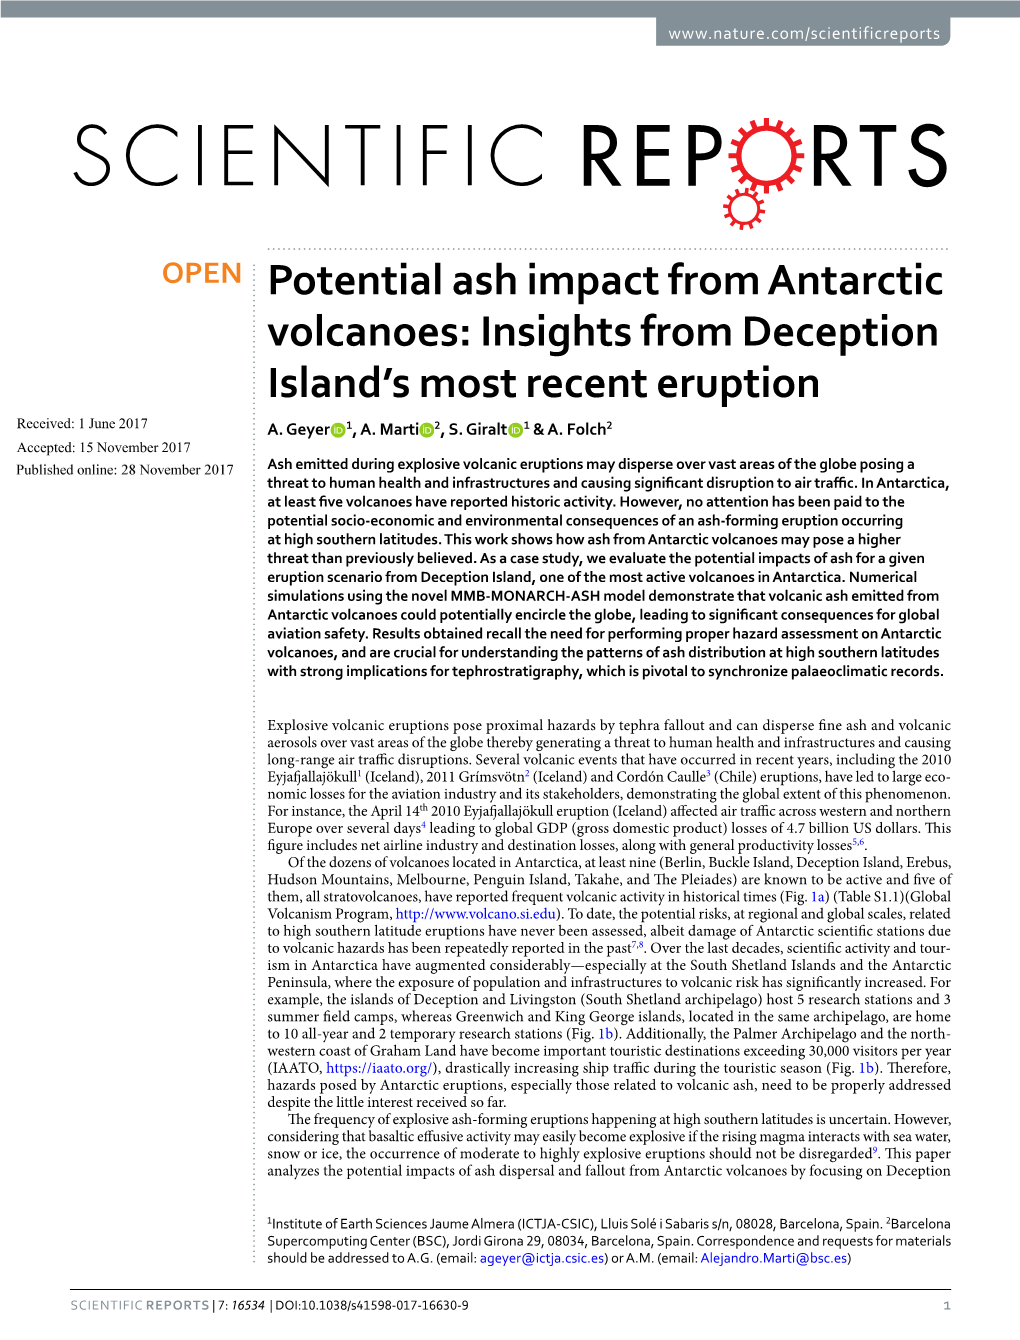 Potential Ash Impact from Antarctic Volcanoes: Insights from Deception Island’S Most Recent Eruption Received: 1 June 2017 A